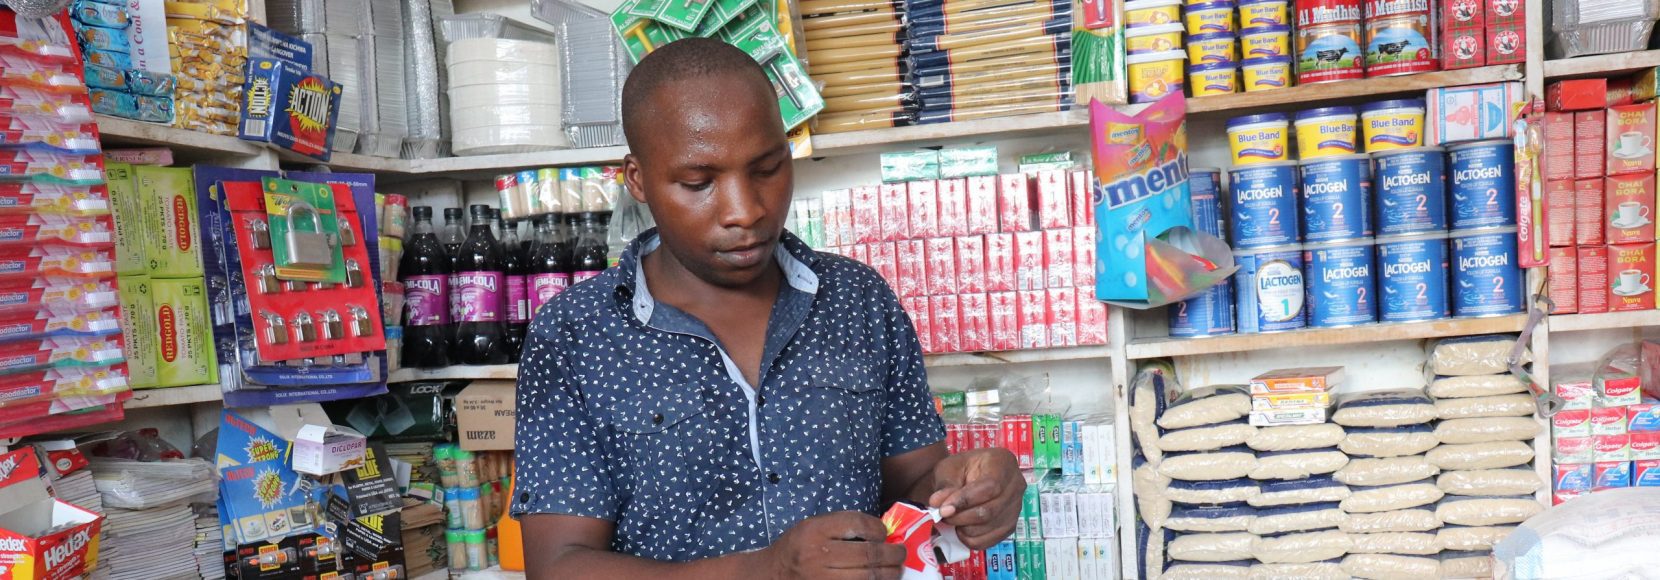 youth-owned shops open new doors for young people like Emanuel Barosha Ndiwene organizes products in his small shop in Dar es Salaam, Tanzania